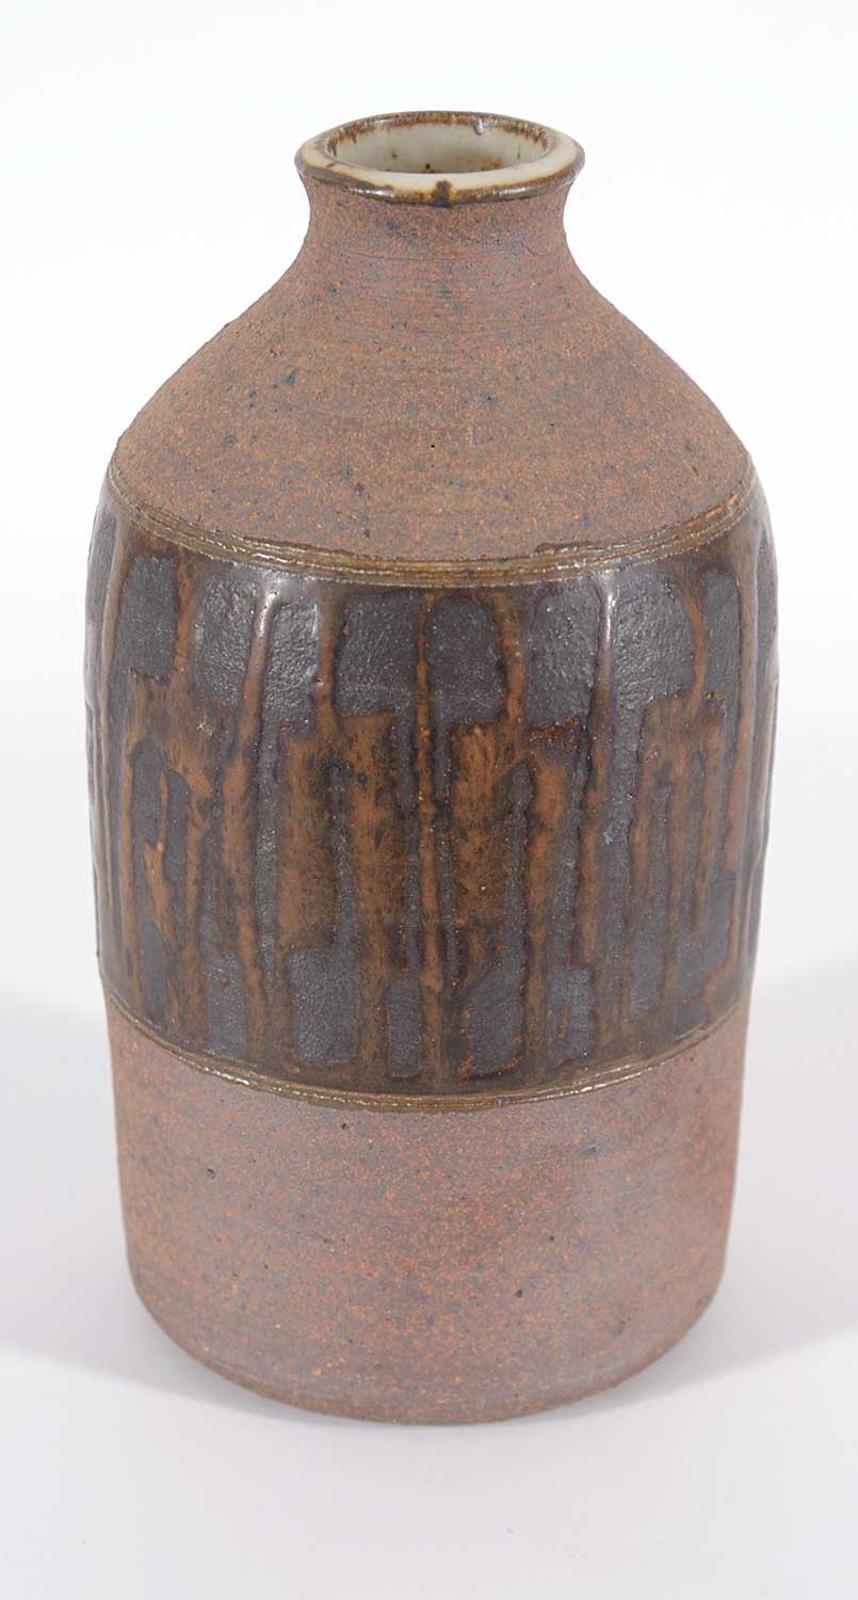 Alberta Craft Council School - Narrow Top Vase with Brown Patterns